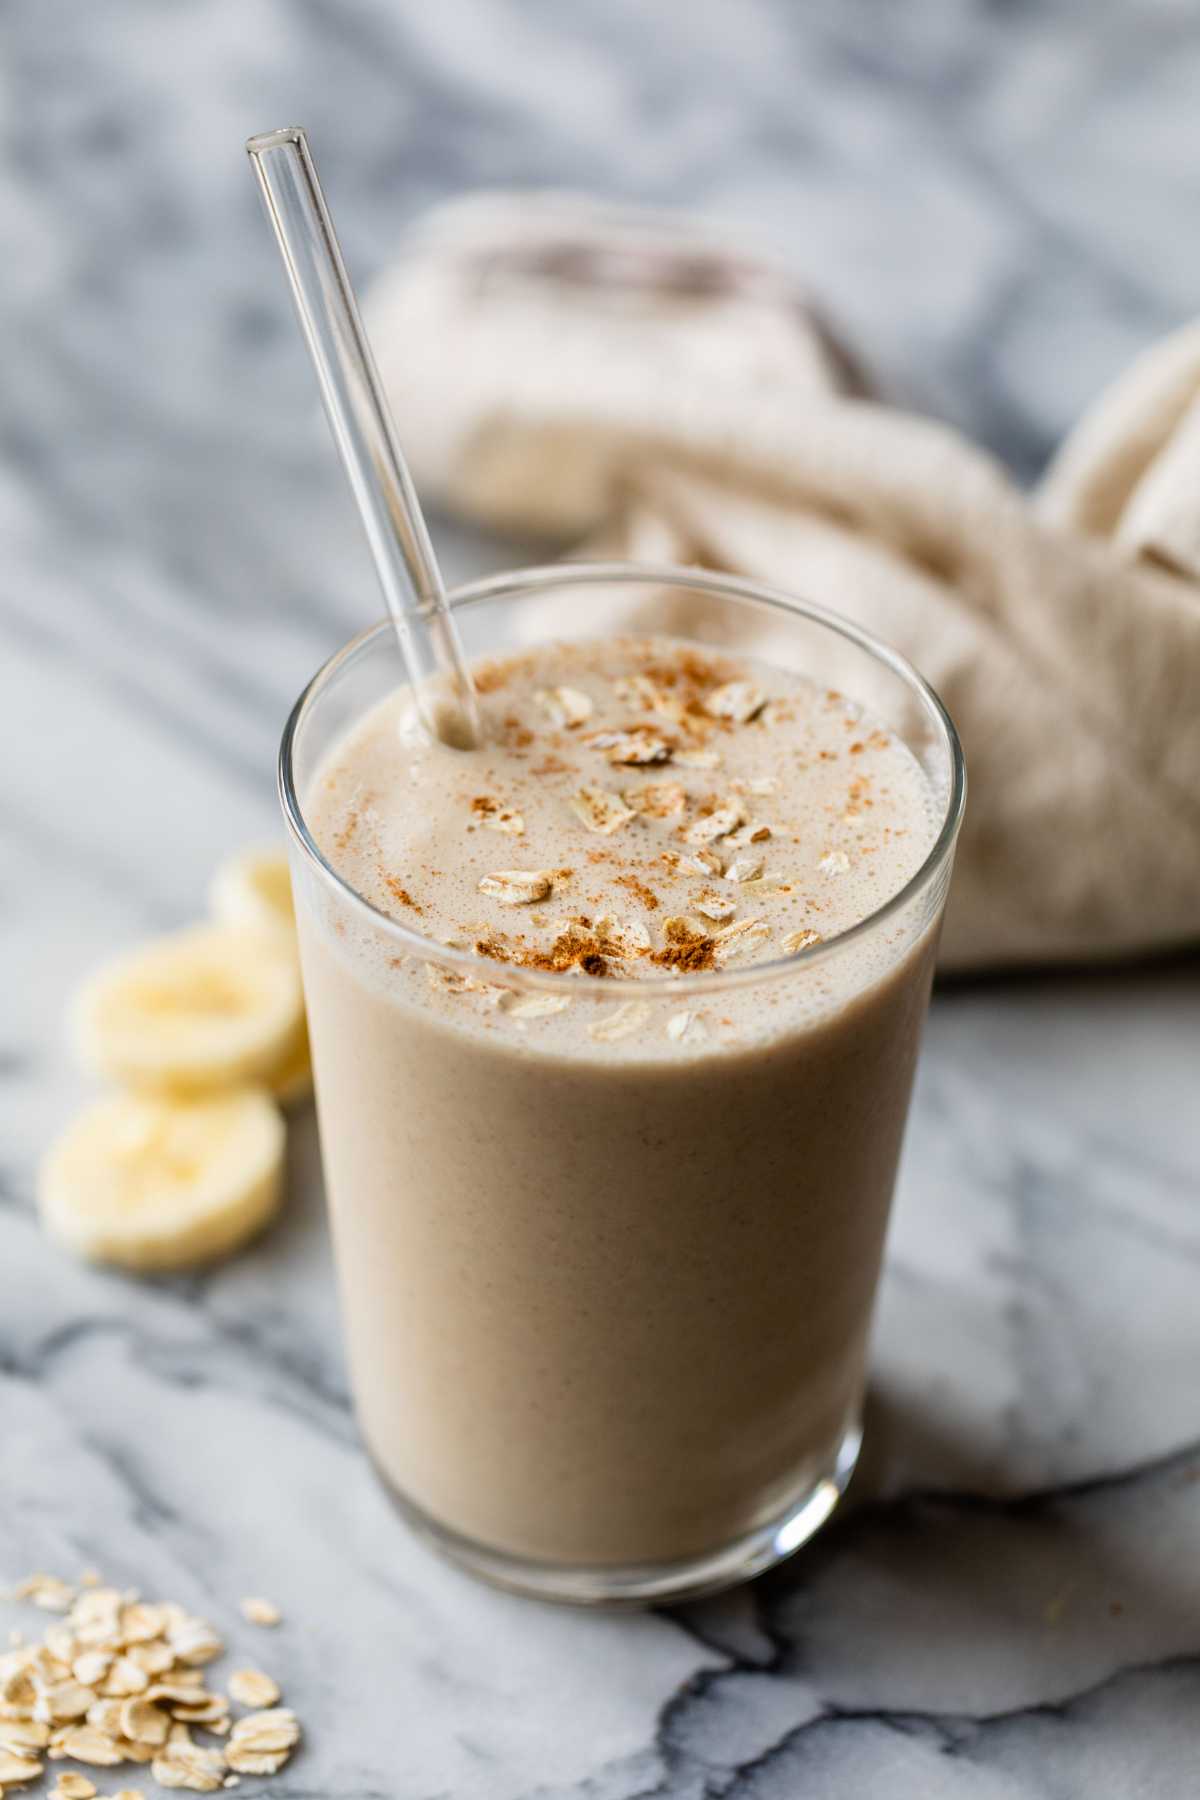 Breakfast smoothie in a glass with a straw garnished with oats and cinnamon.